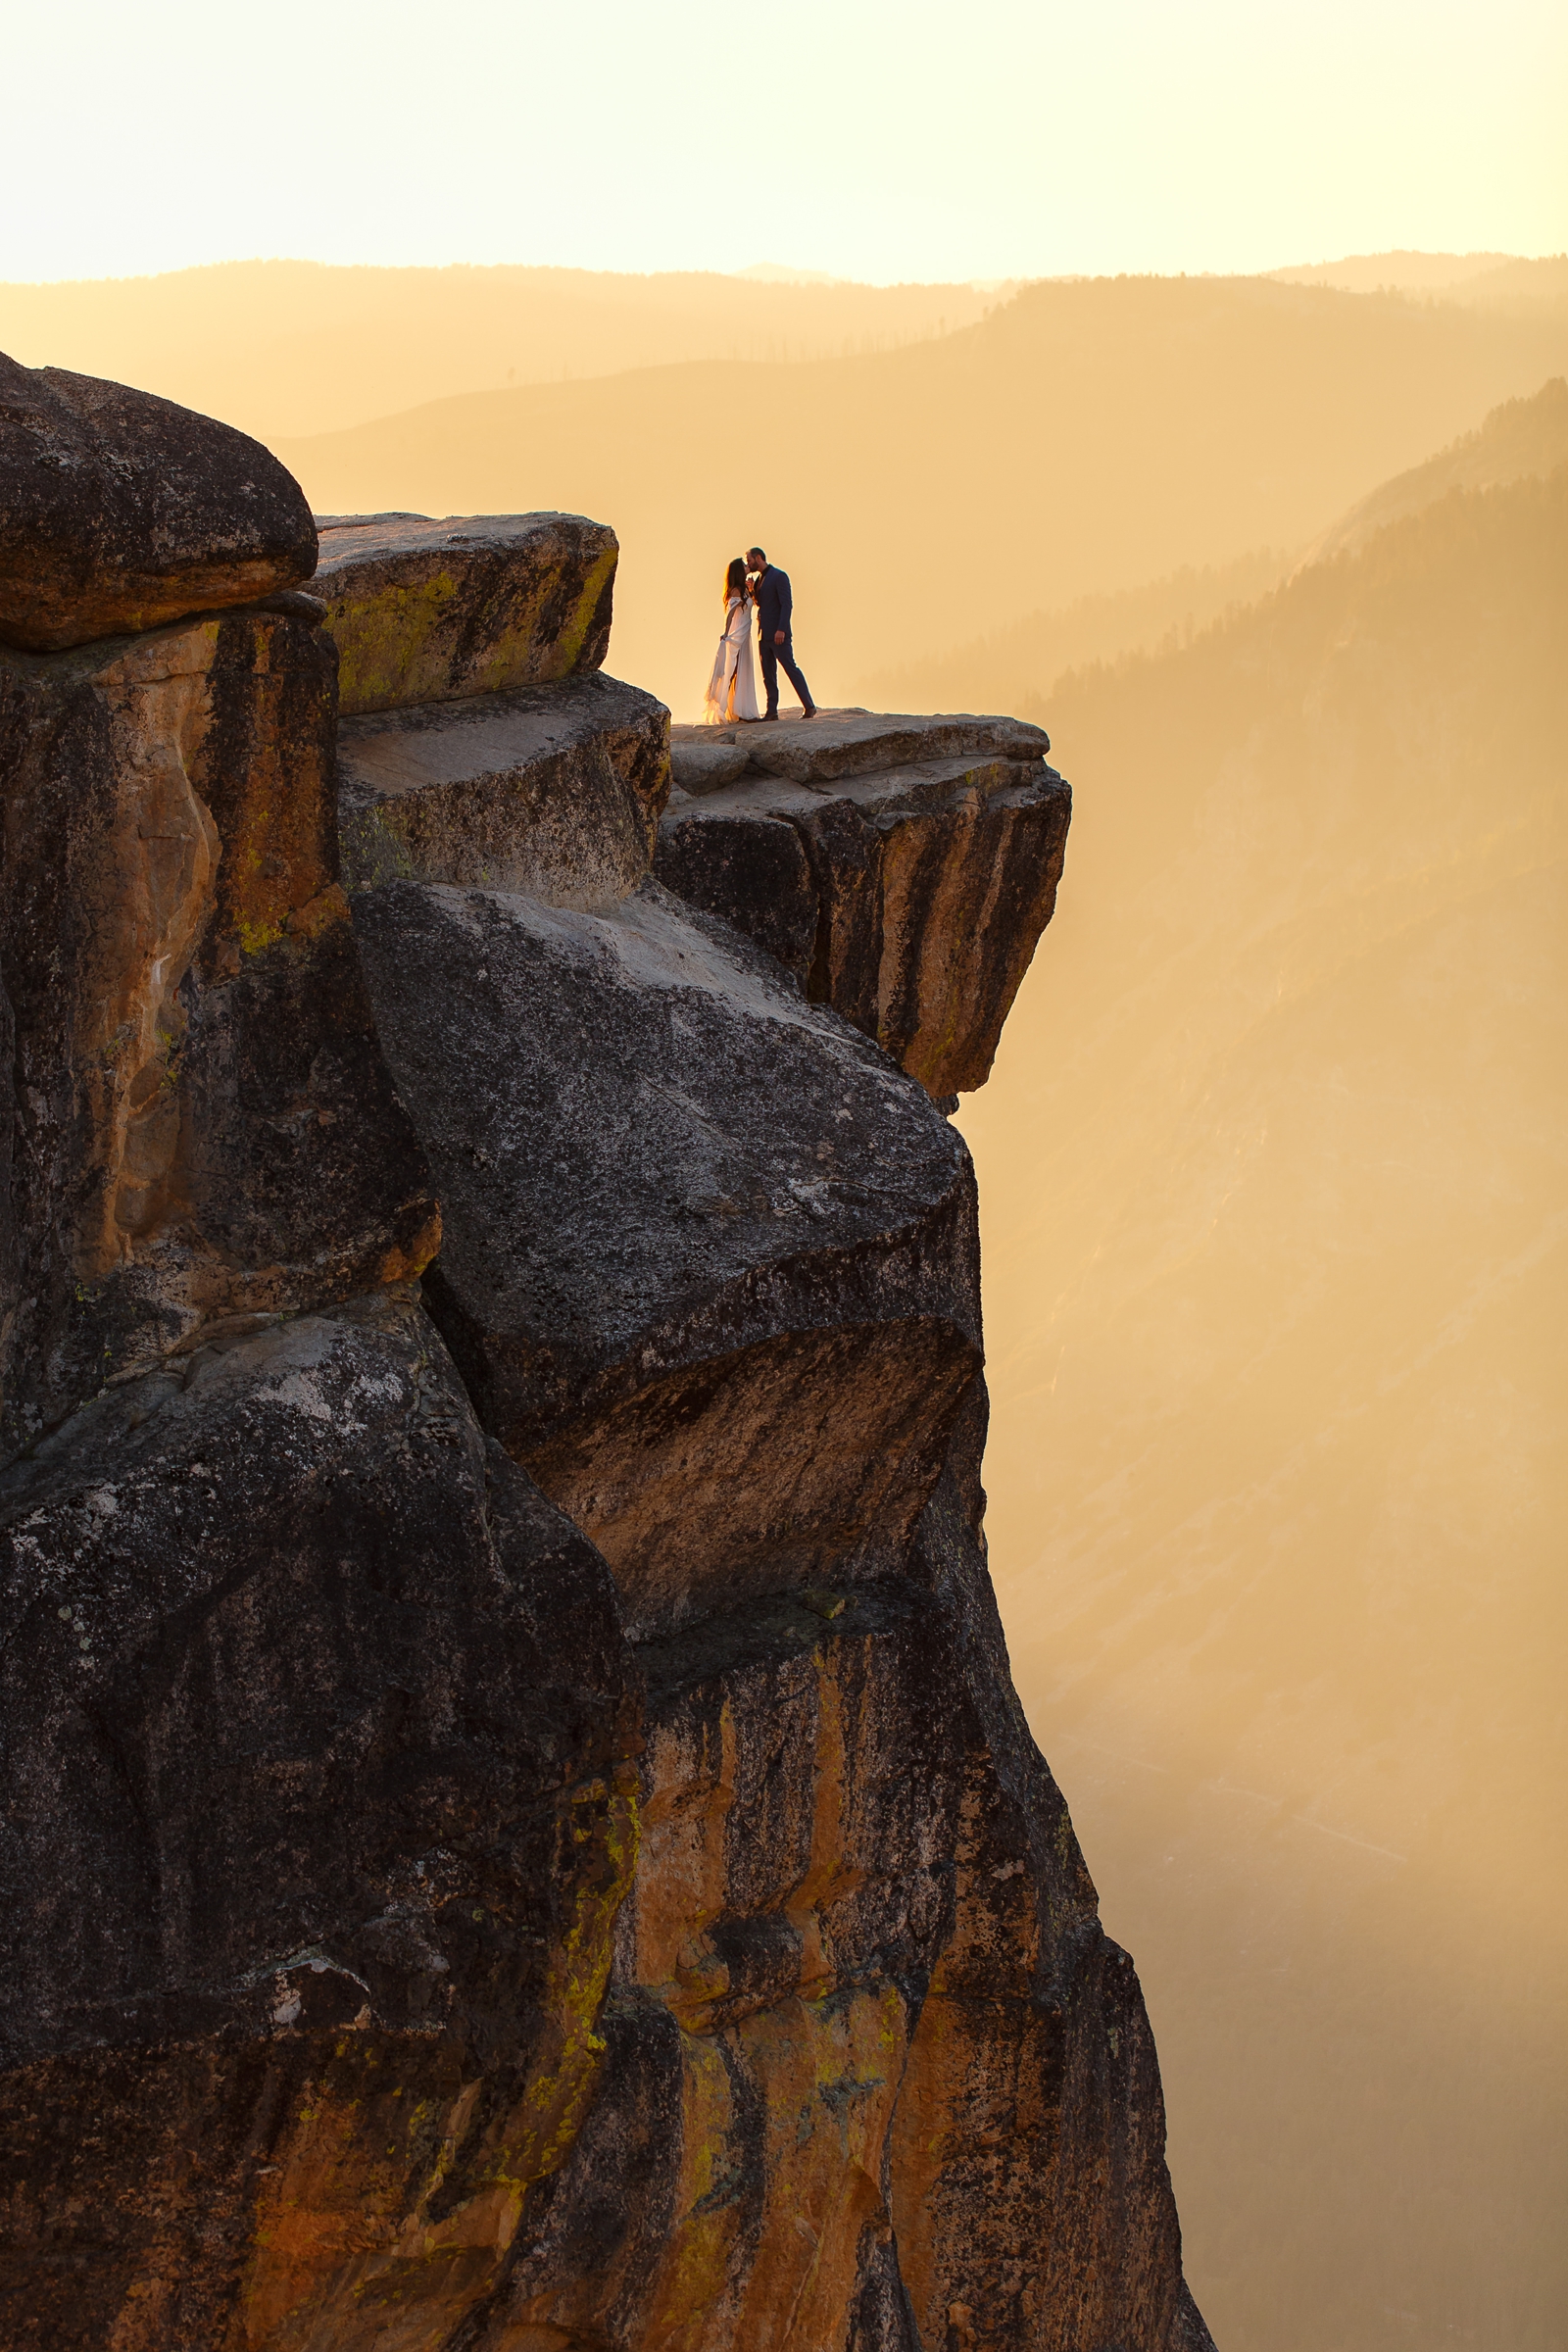 Epic sunset elopement at Taft Point in Yosemite National Park.